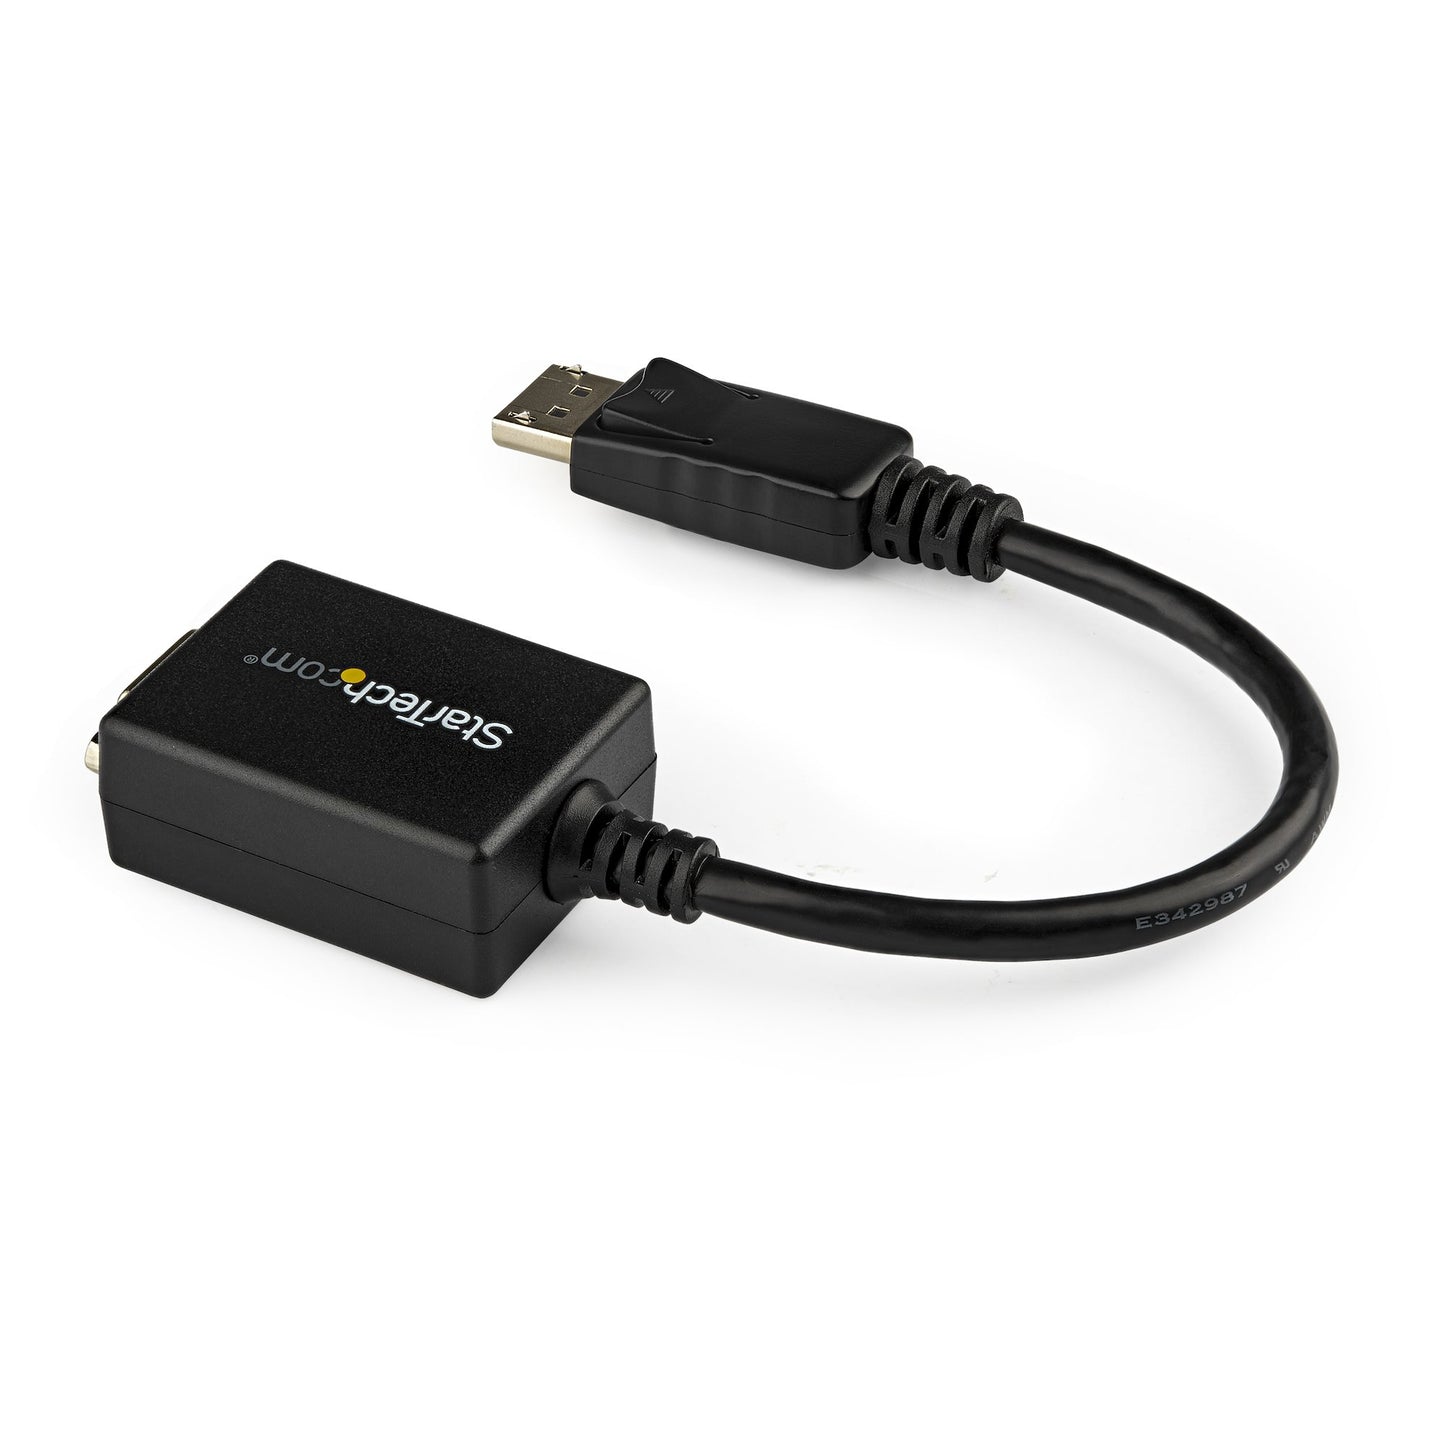 StarTech.com DisplayPort to VGA Adapter - Active DP to VGA Converter - 1080p Video - DisplayPort Certified - DP/DP++ Source to VGA Monitor Cable Adapter Dongle - Latching DP Connector-1